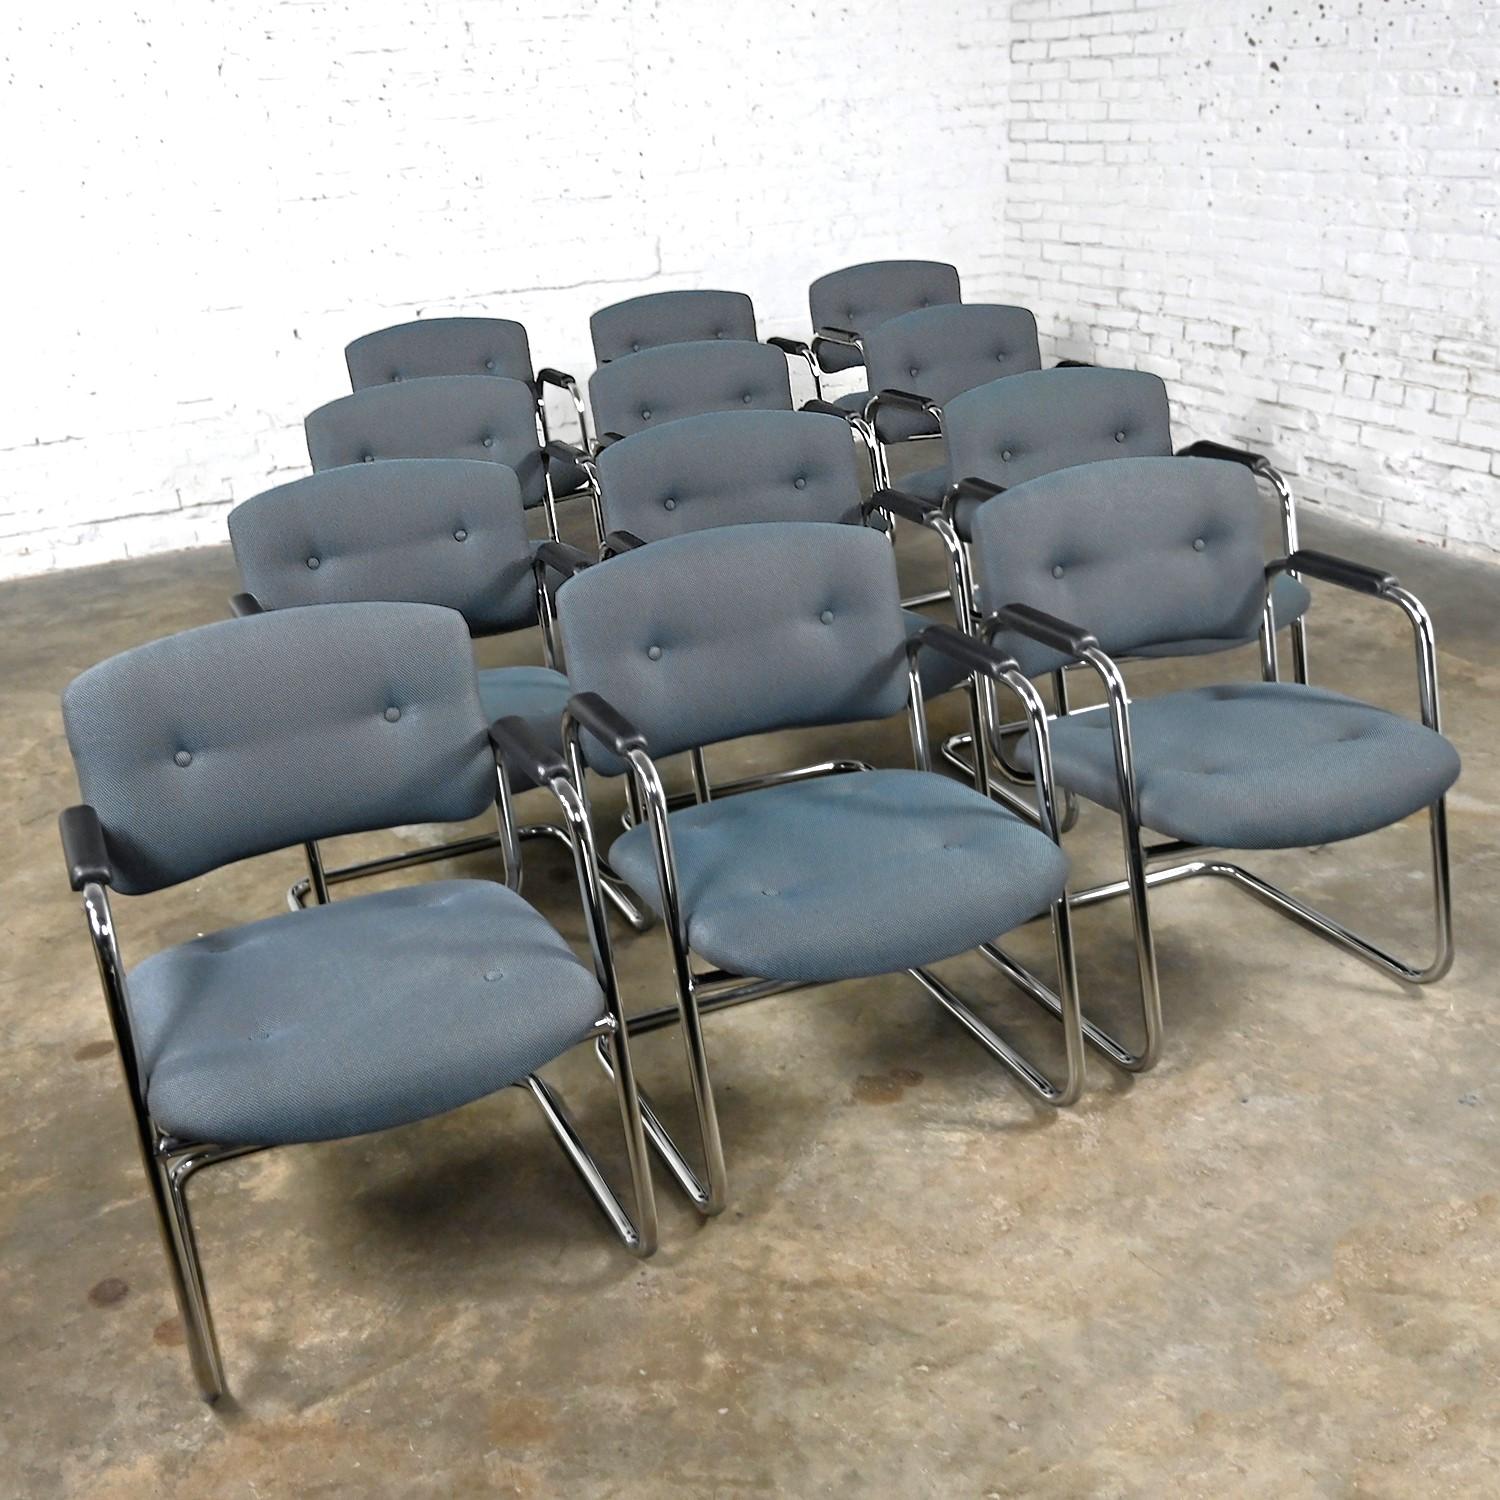 Awesome gray & chrome vintage cantilever chairs by United Chair Company in the style of Steelcase, set of 12. Comprised of a chrome cantilever frame, black plastic armrests, and their original gray tweed fabric with button details. This listing is